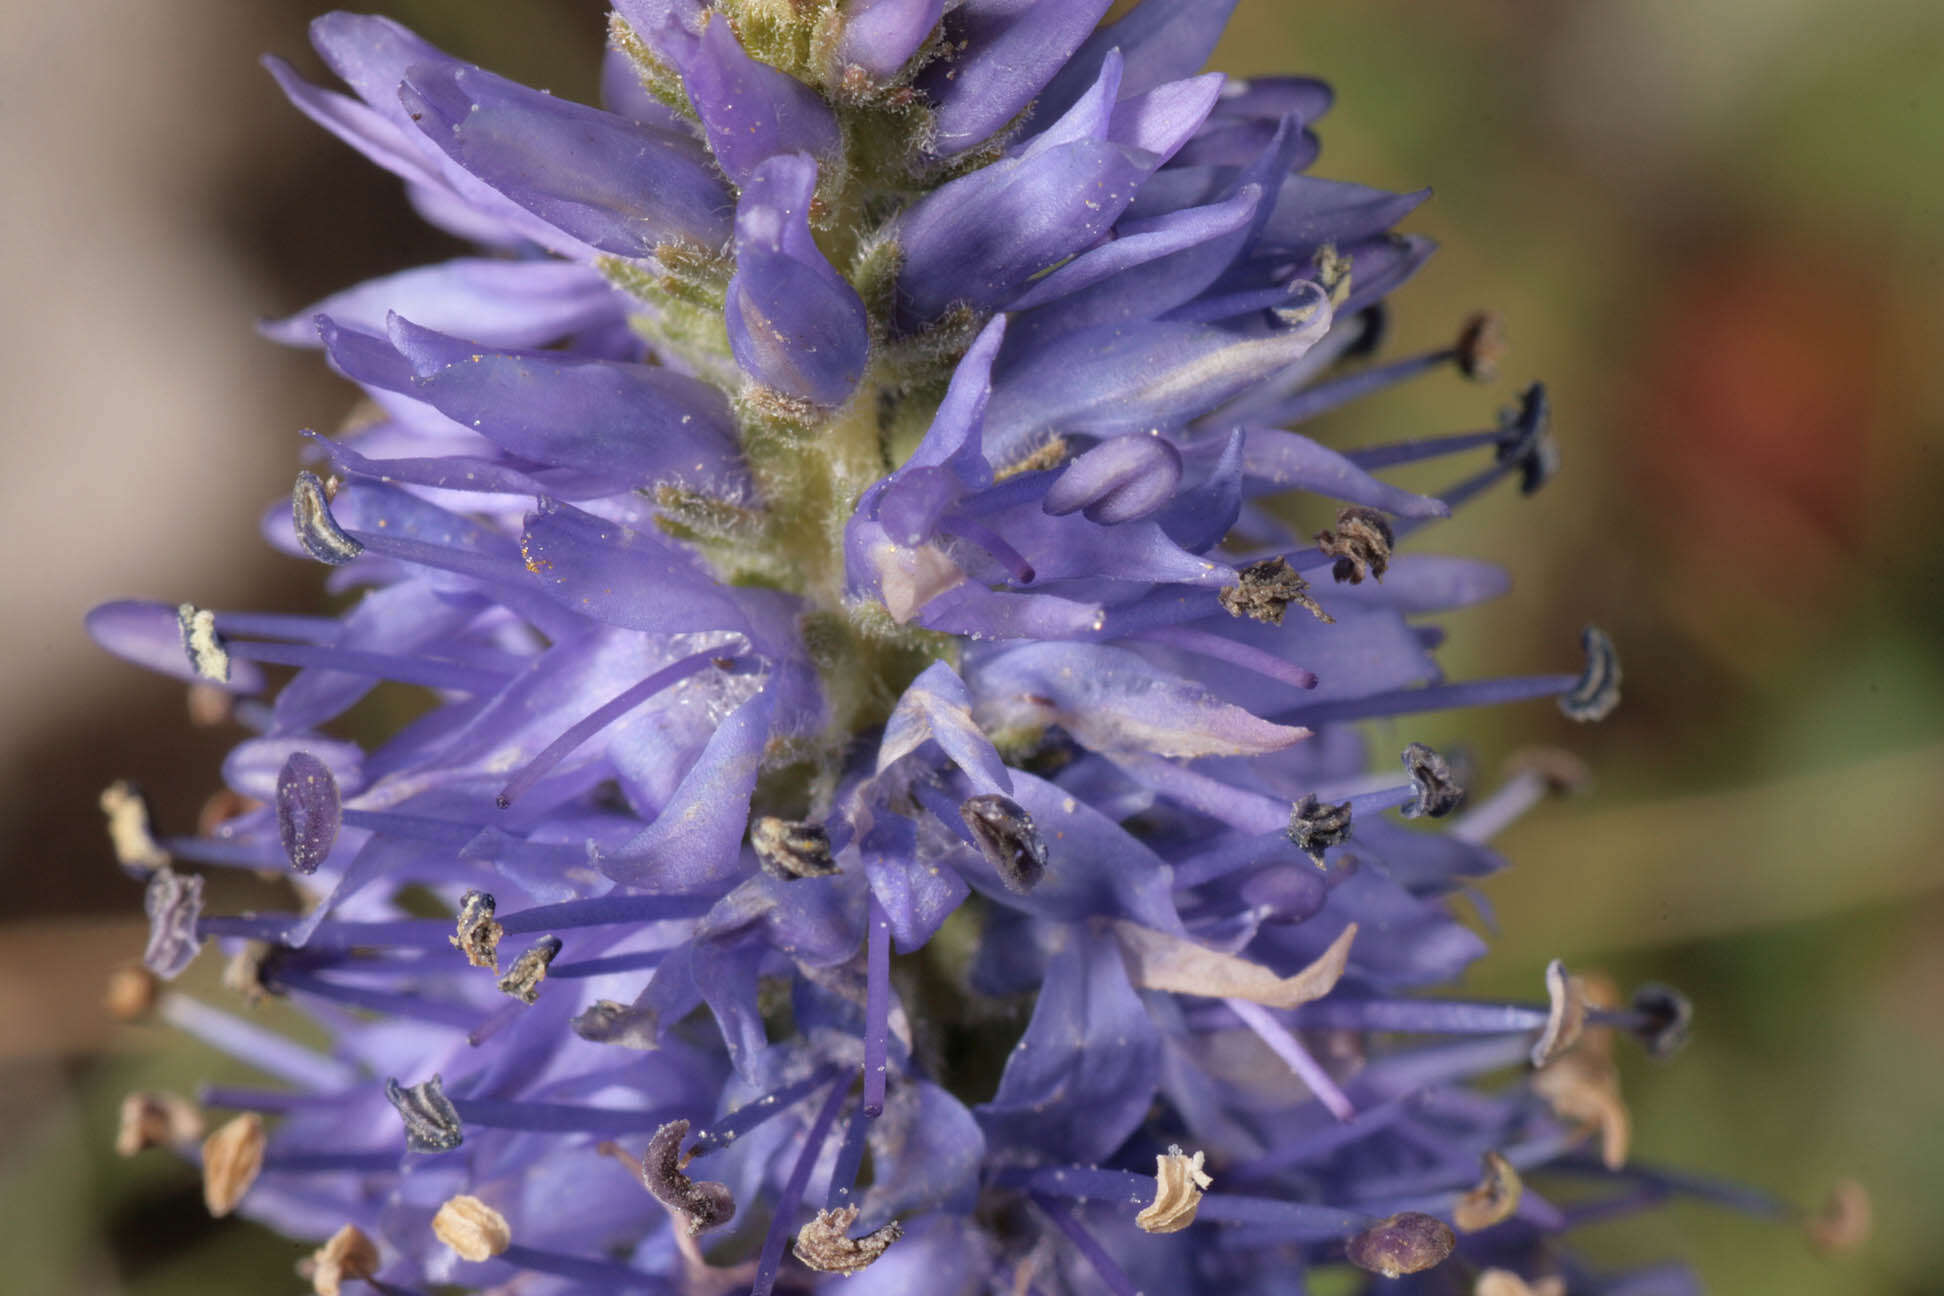 Image of spiked speedwell